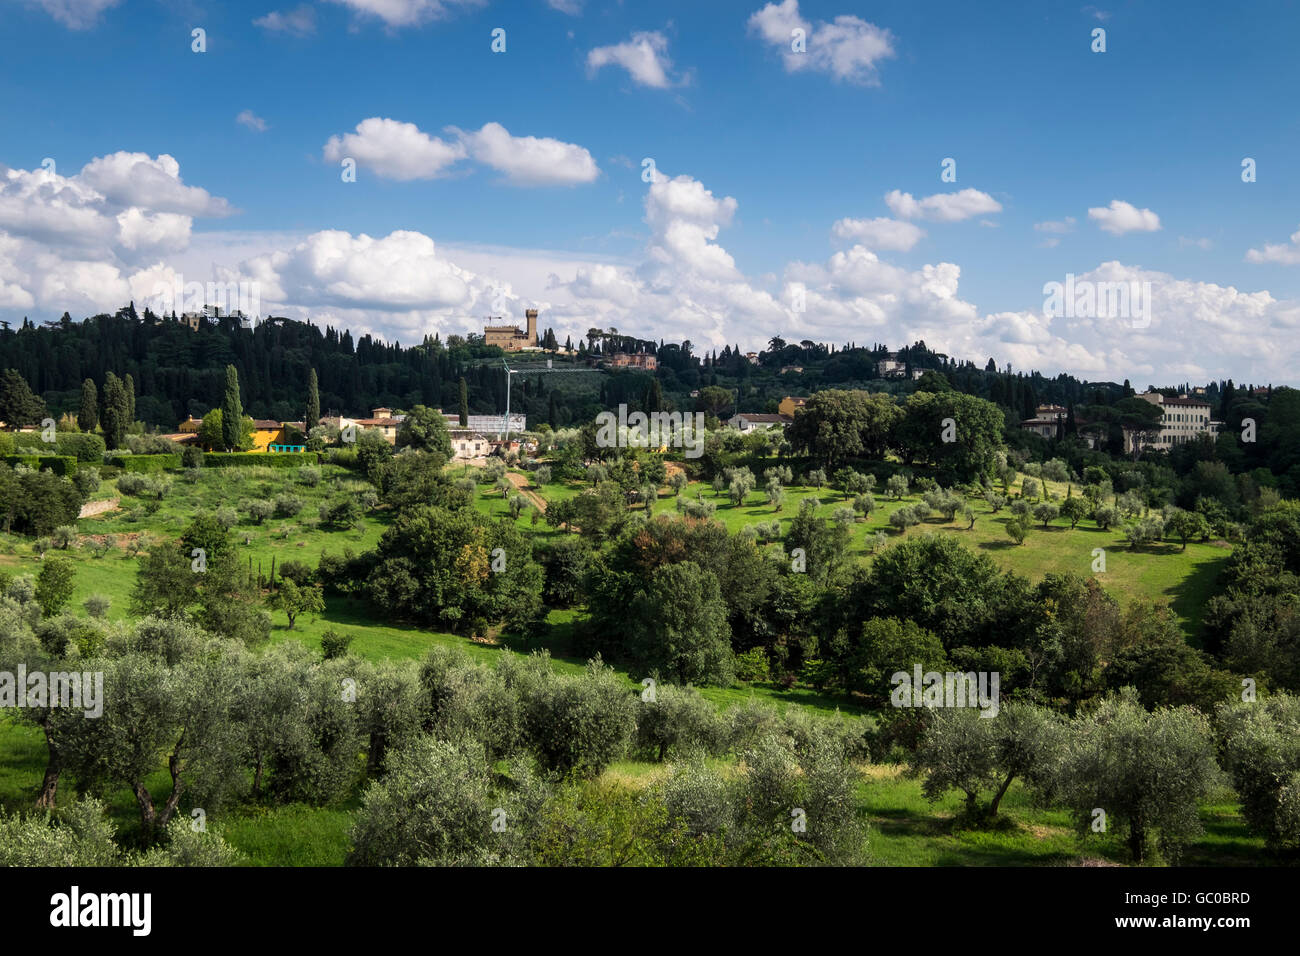 View over olive groves from the Giardino di Boboli on the outskirts of Florence, Tuscany, Italy Stock Photo